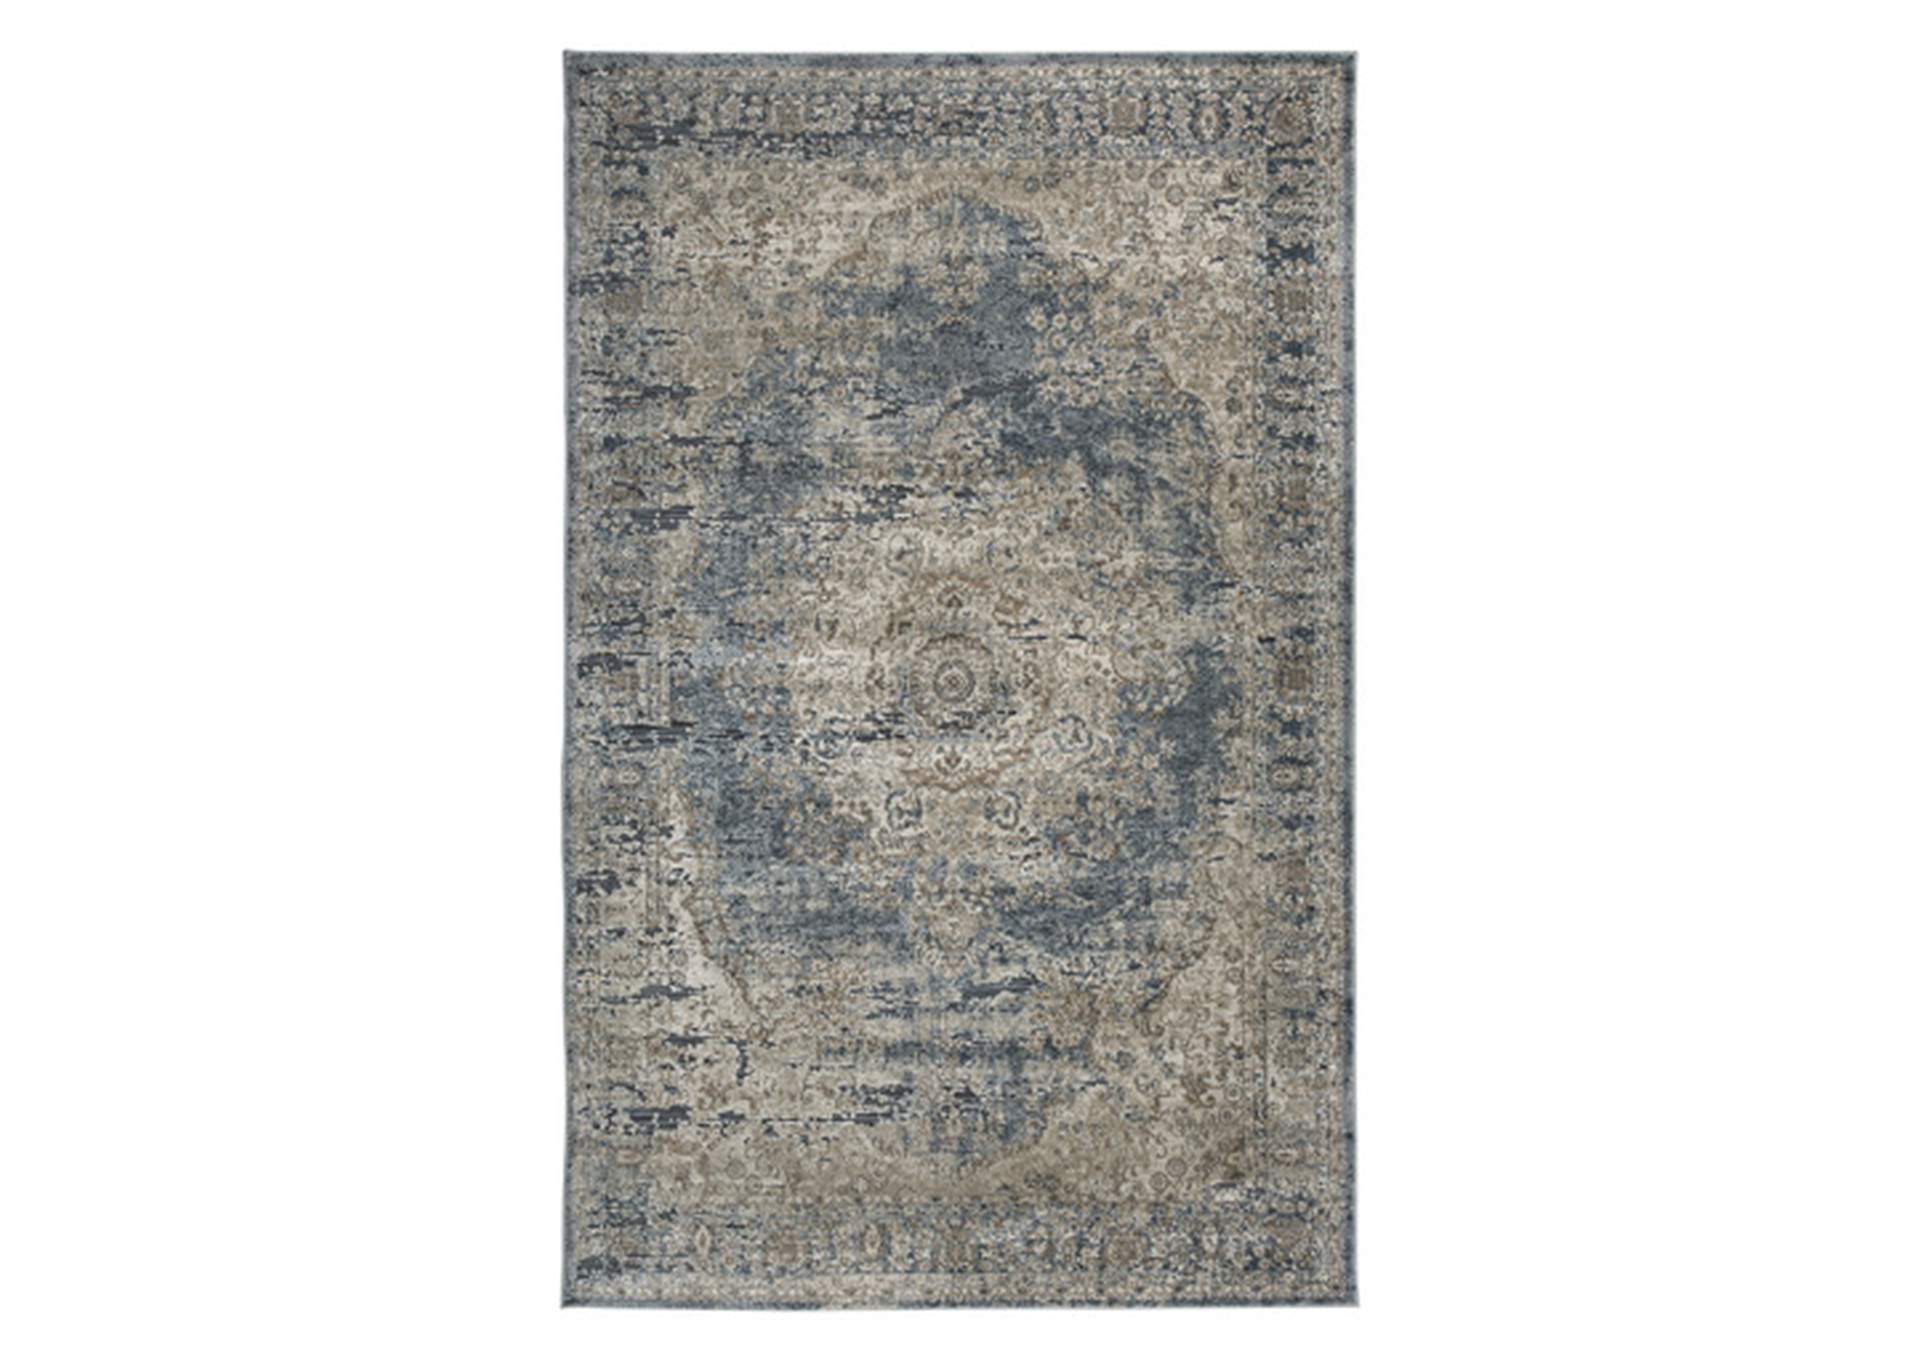 South 8' x 10' Rug,Signature Design By Ashley